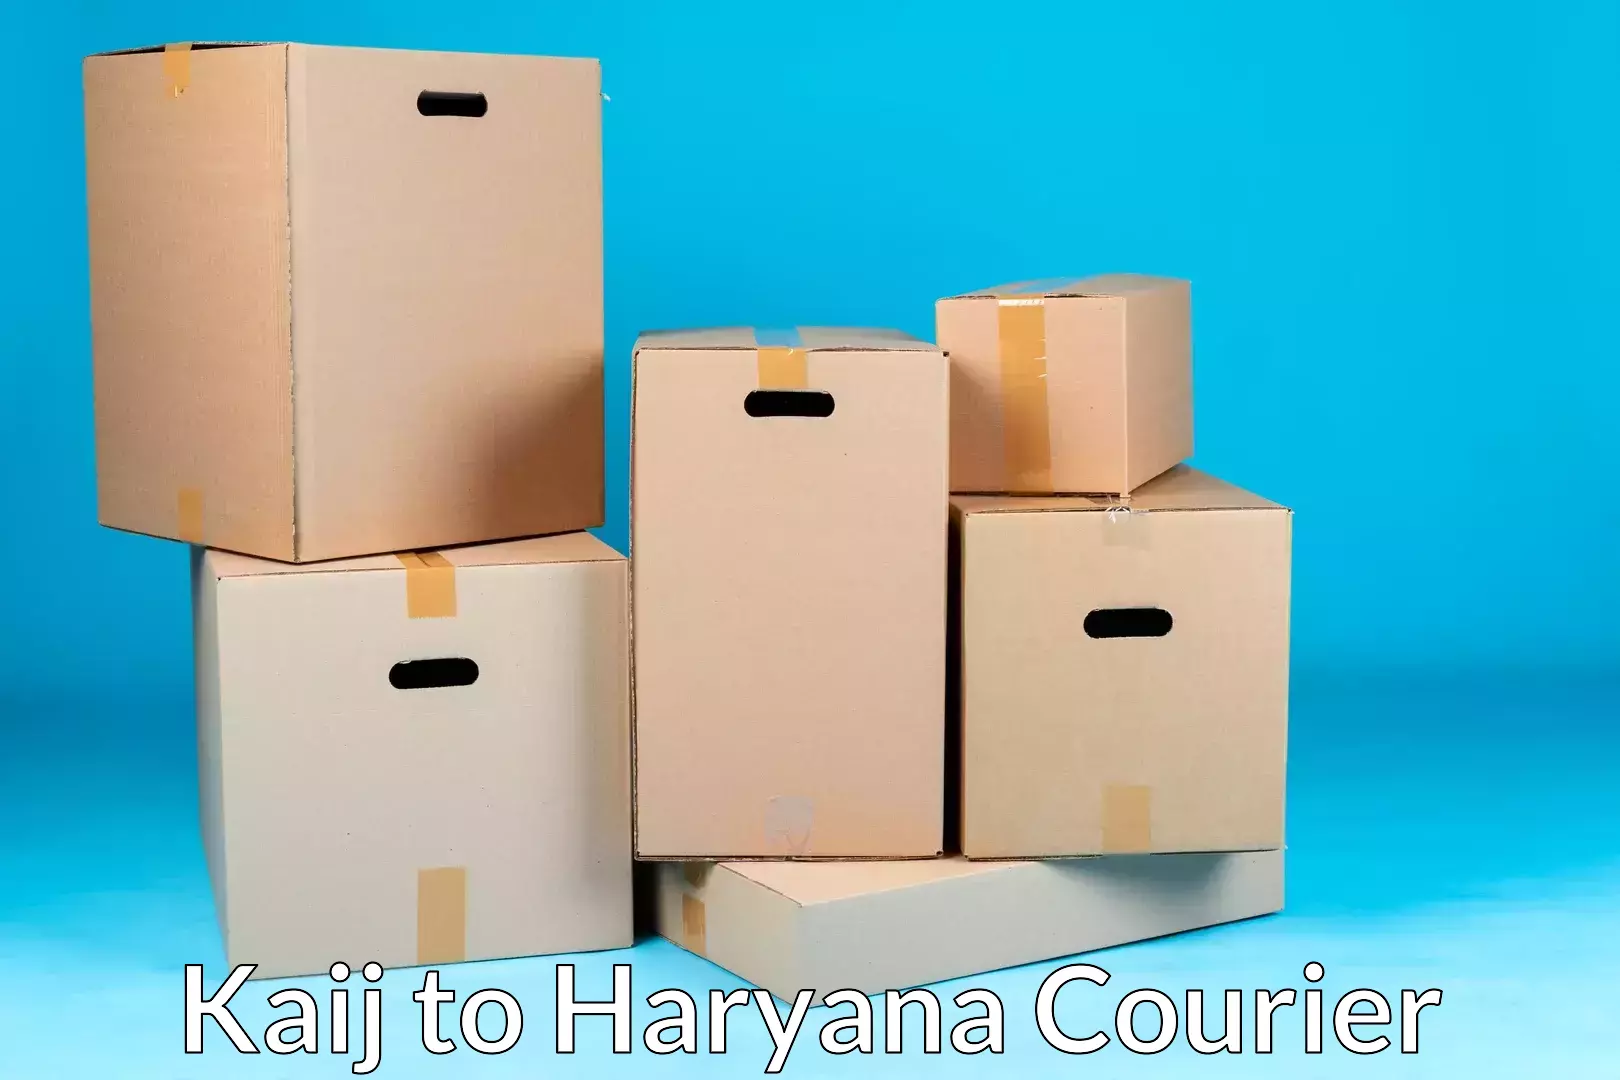 Professional moving assistance Kaij to Haryana